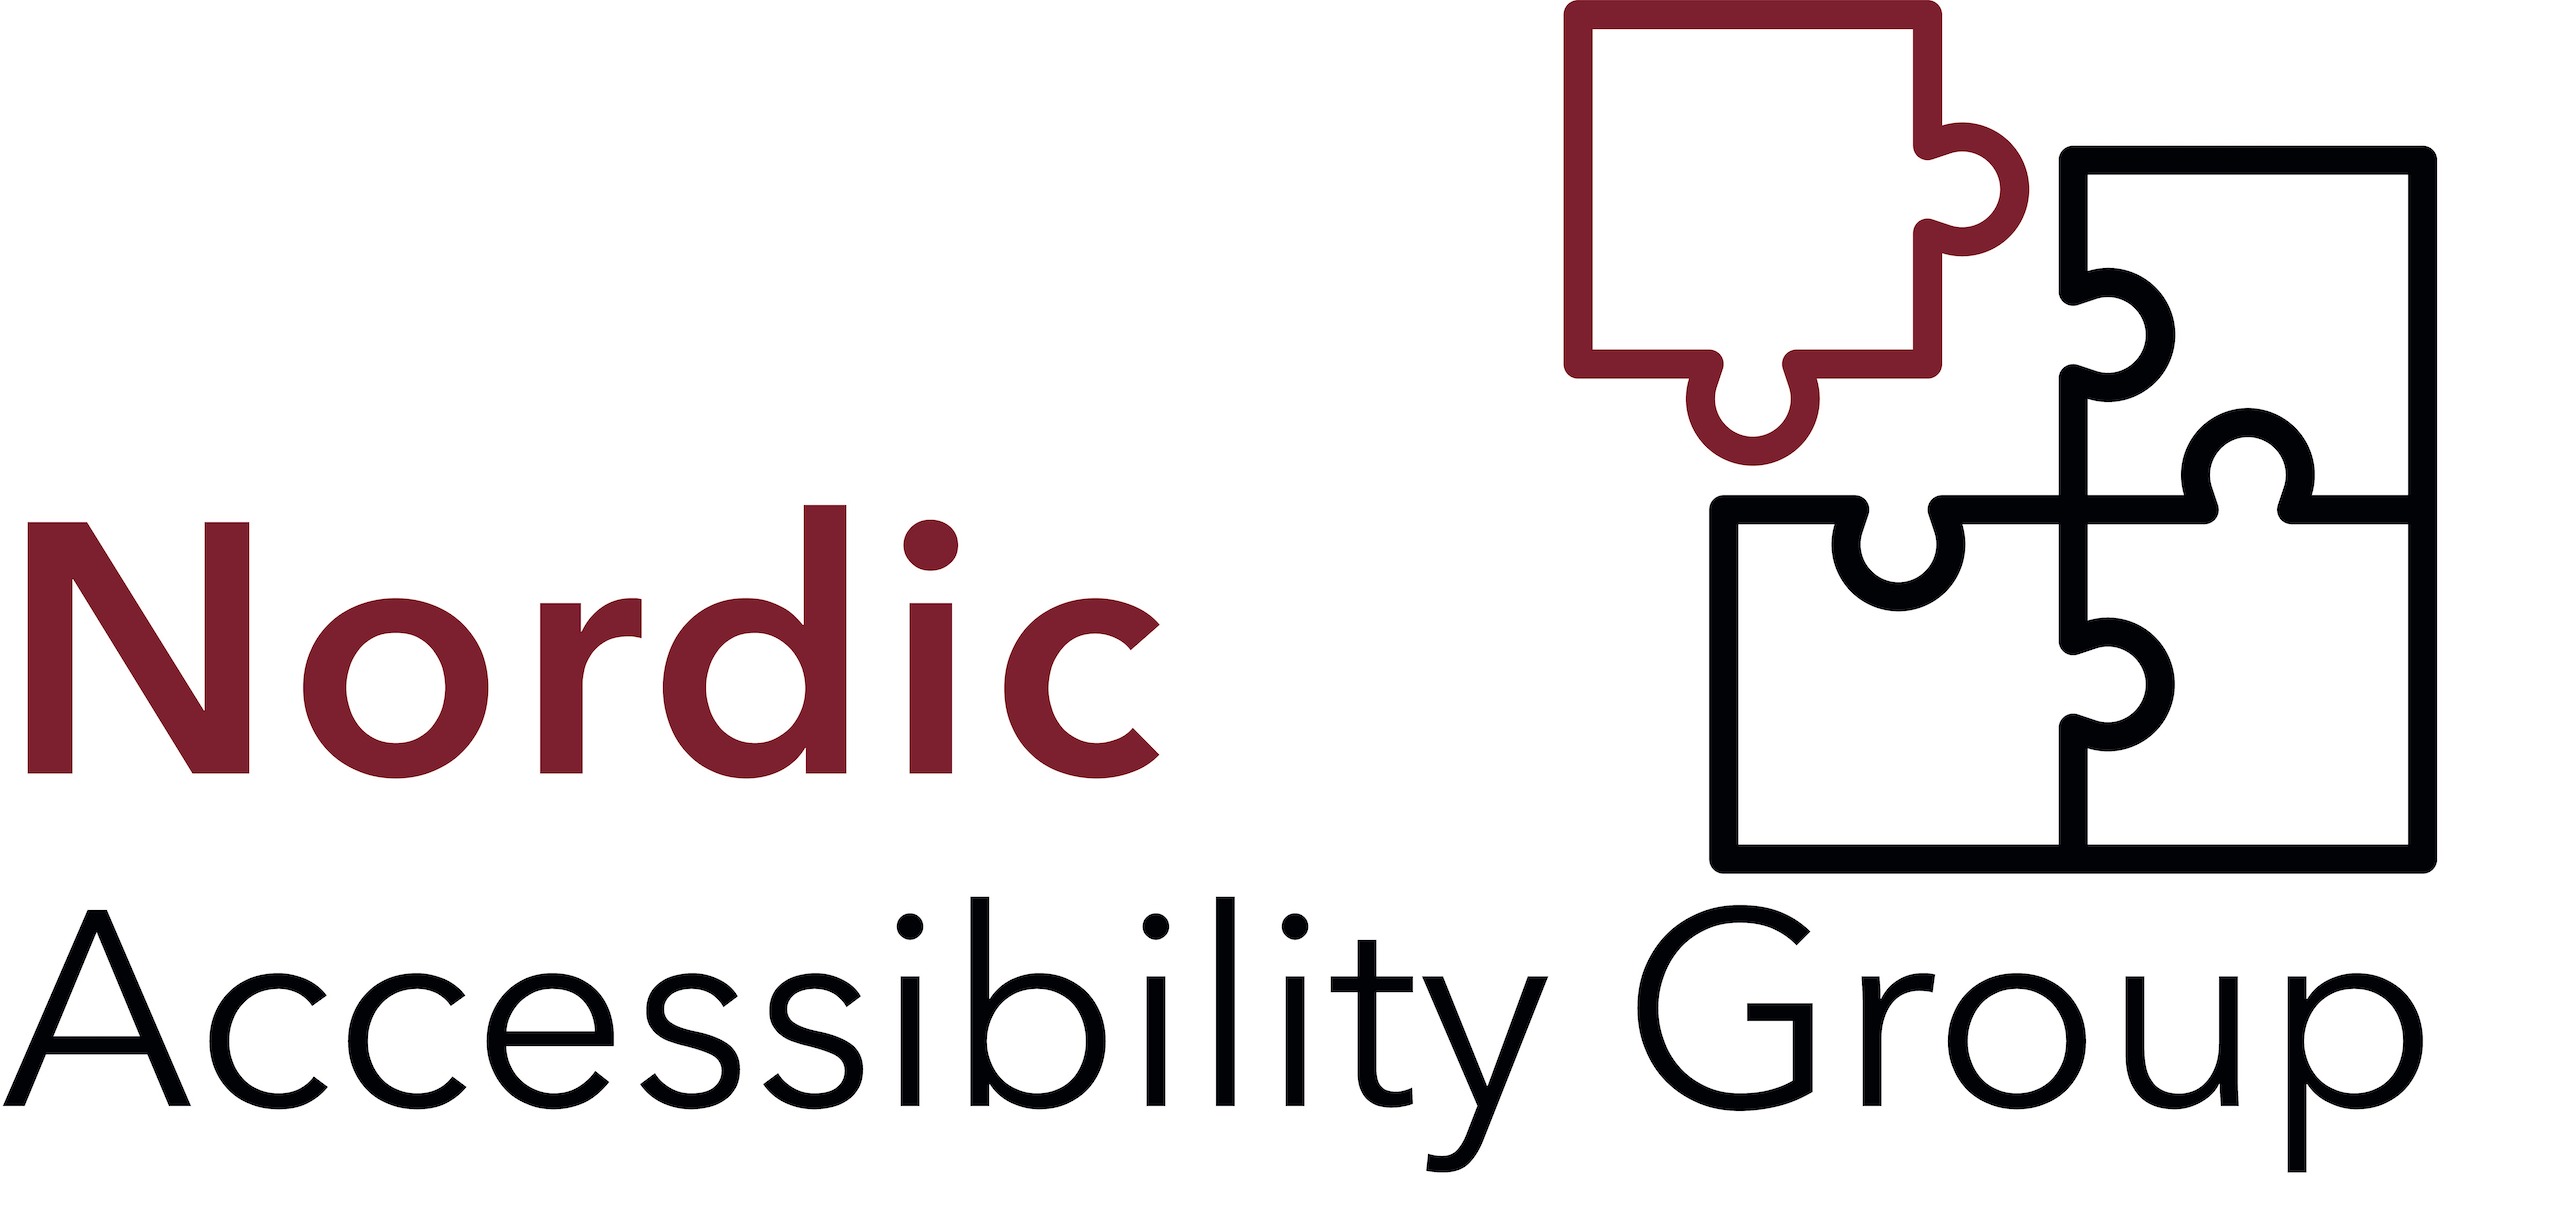 Nordic Accessibility Groups logotyp